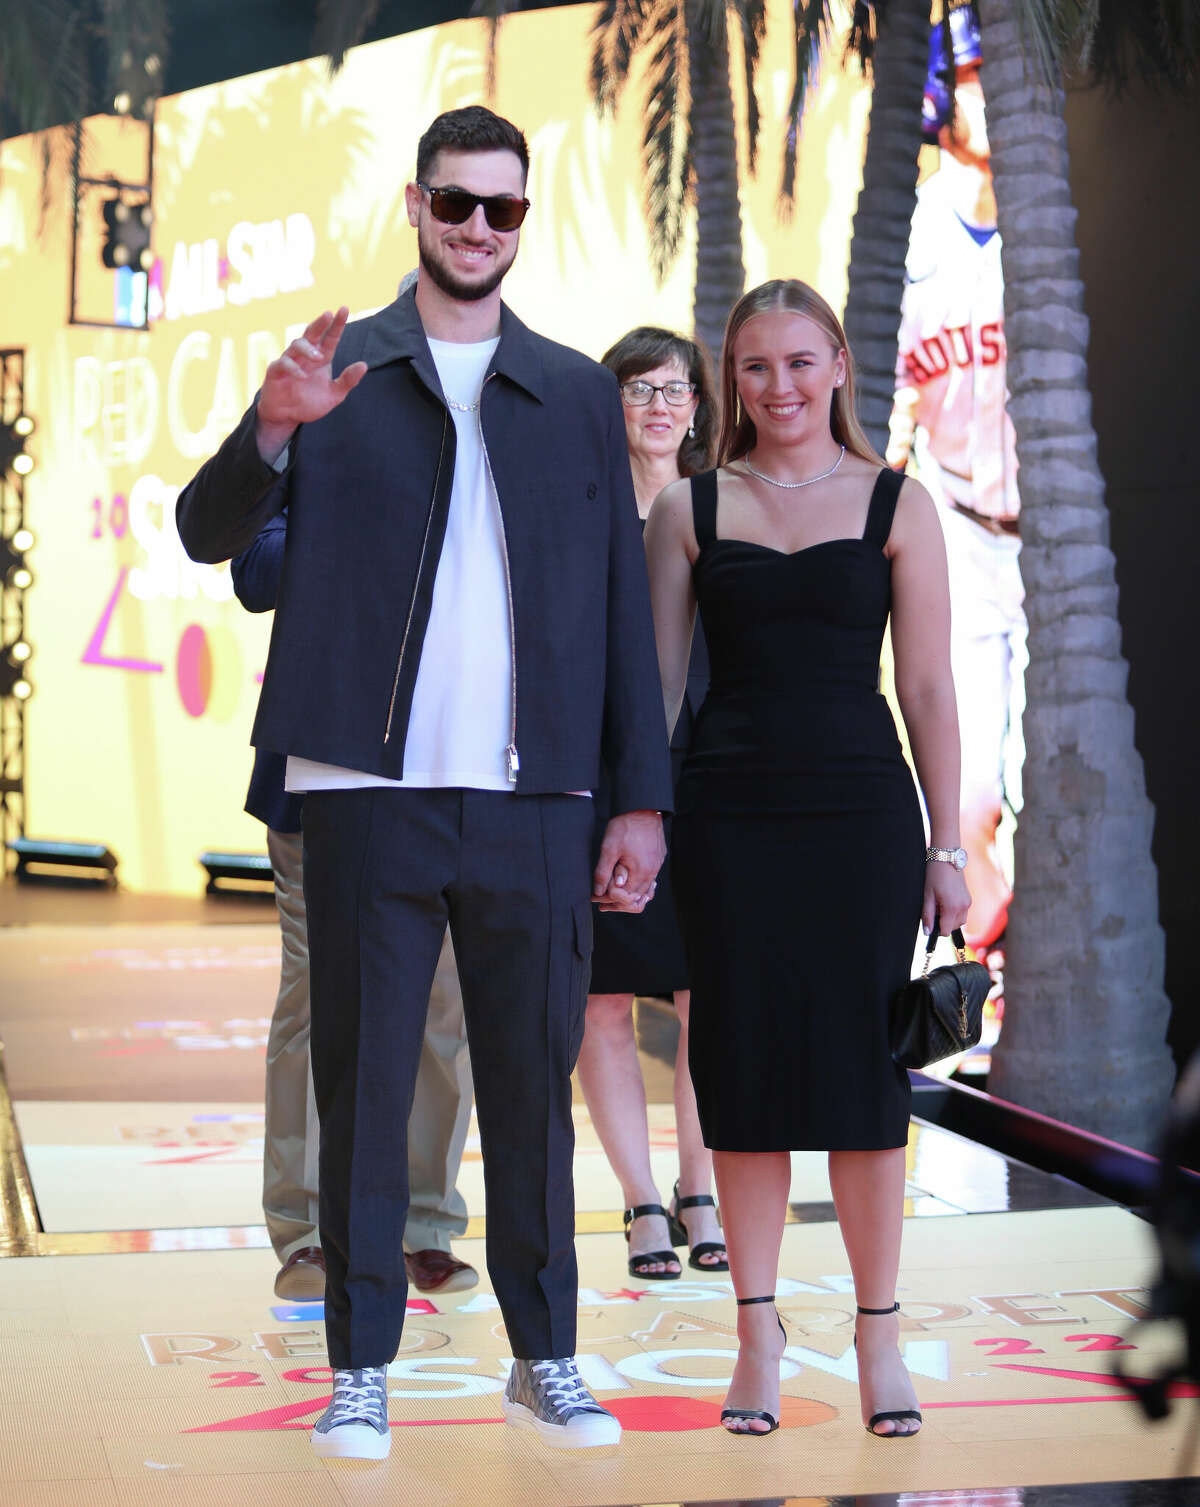 Astros right fielder Kyle Tucker and girlfriend Samantha Scott arrive at The 2022 MLB All-Star Game Red Carpet Show at XBOX Plaza on July 19, 2022 in Los Angeles, California.